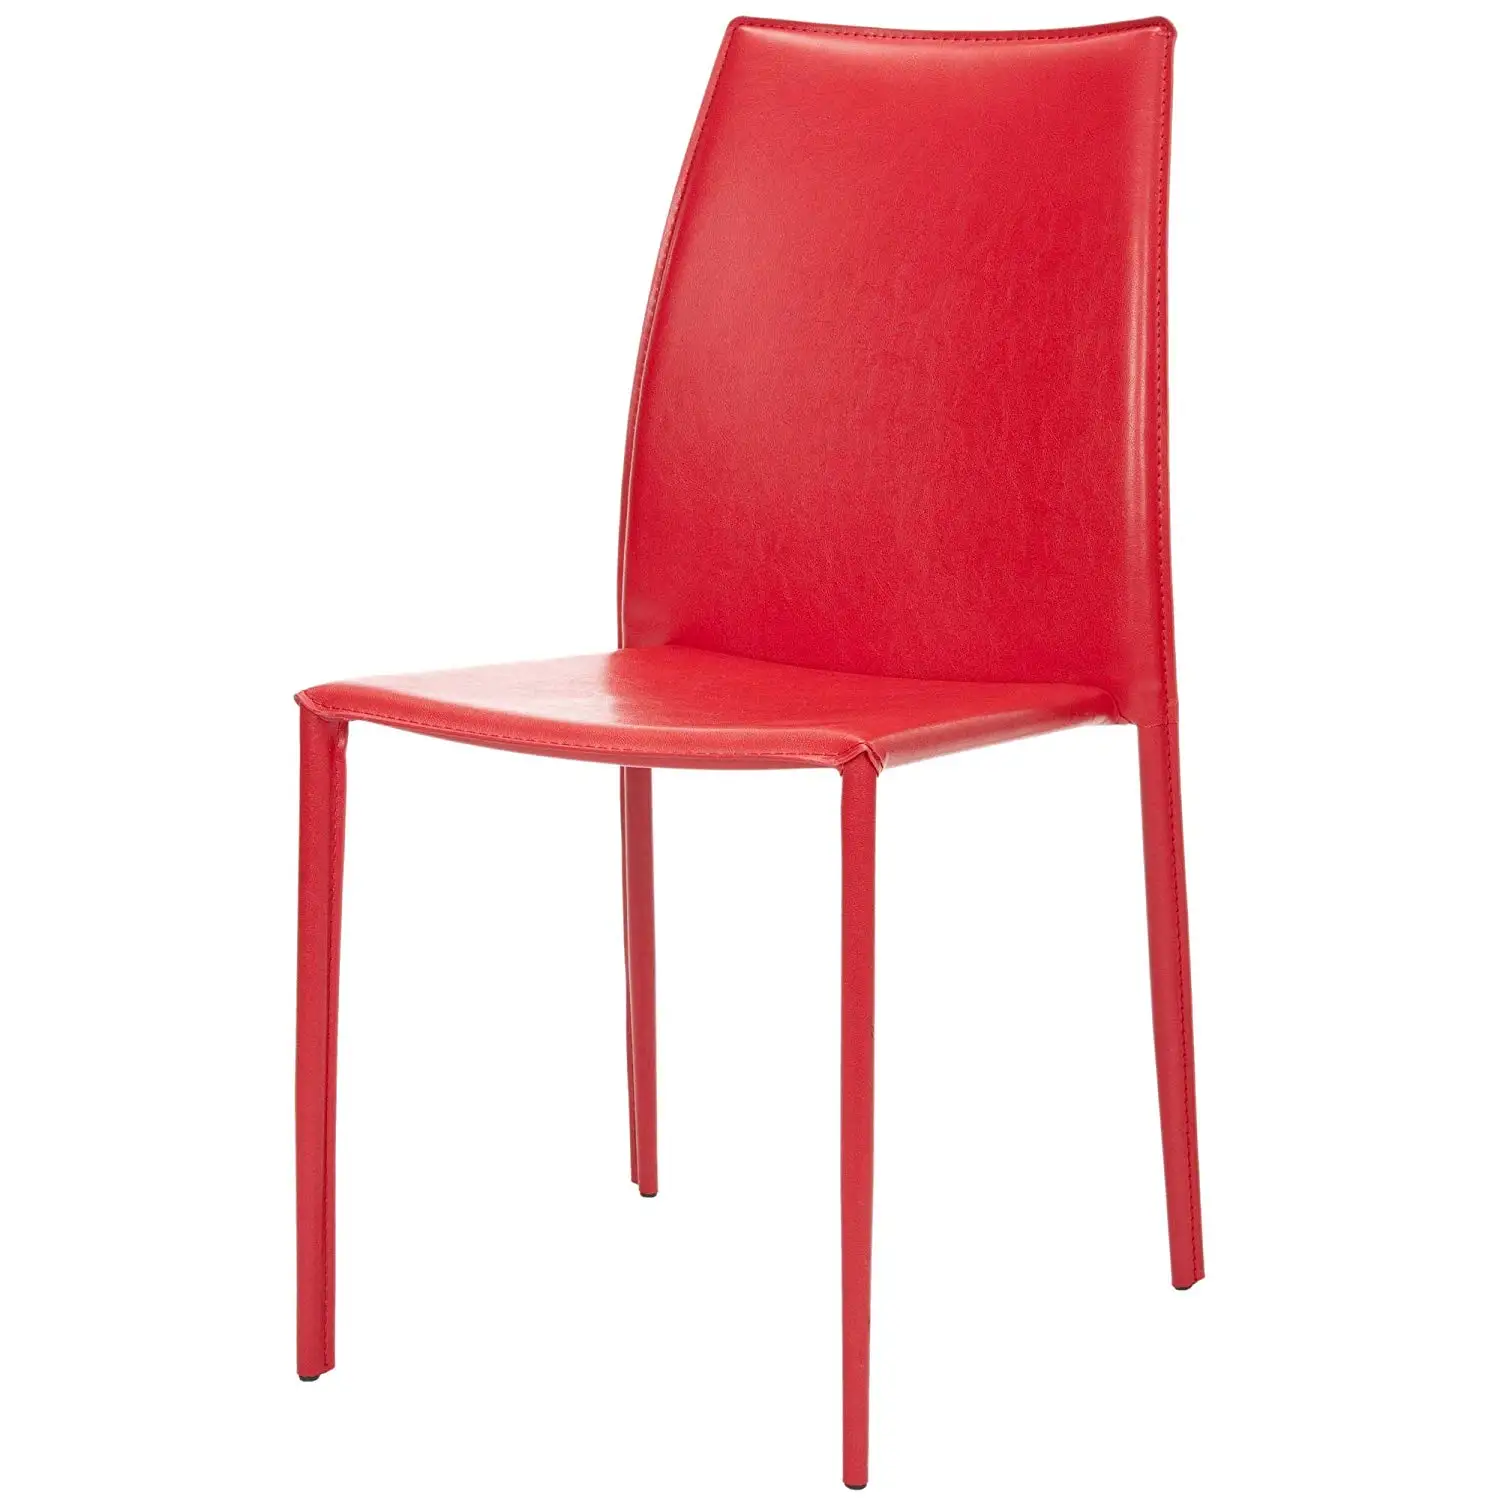 Cheap Red Dining Chairs, find Red Dining Chairs deals on line at ...